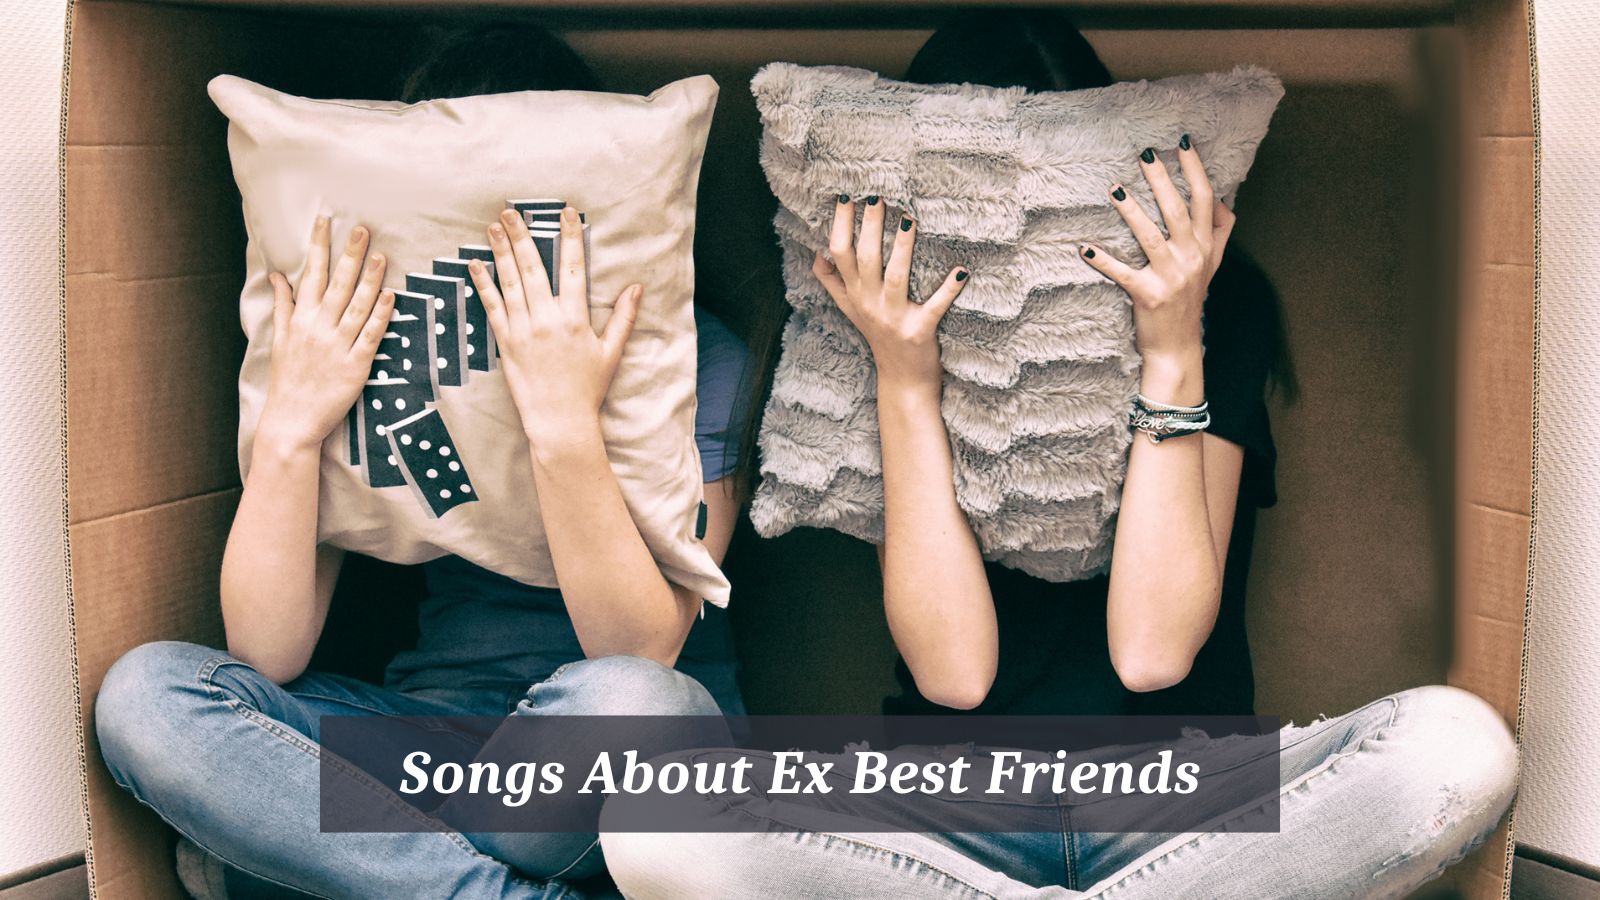 Songs About Ex Best Friends